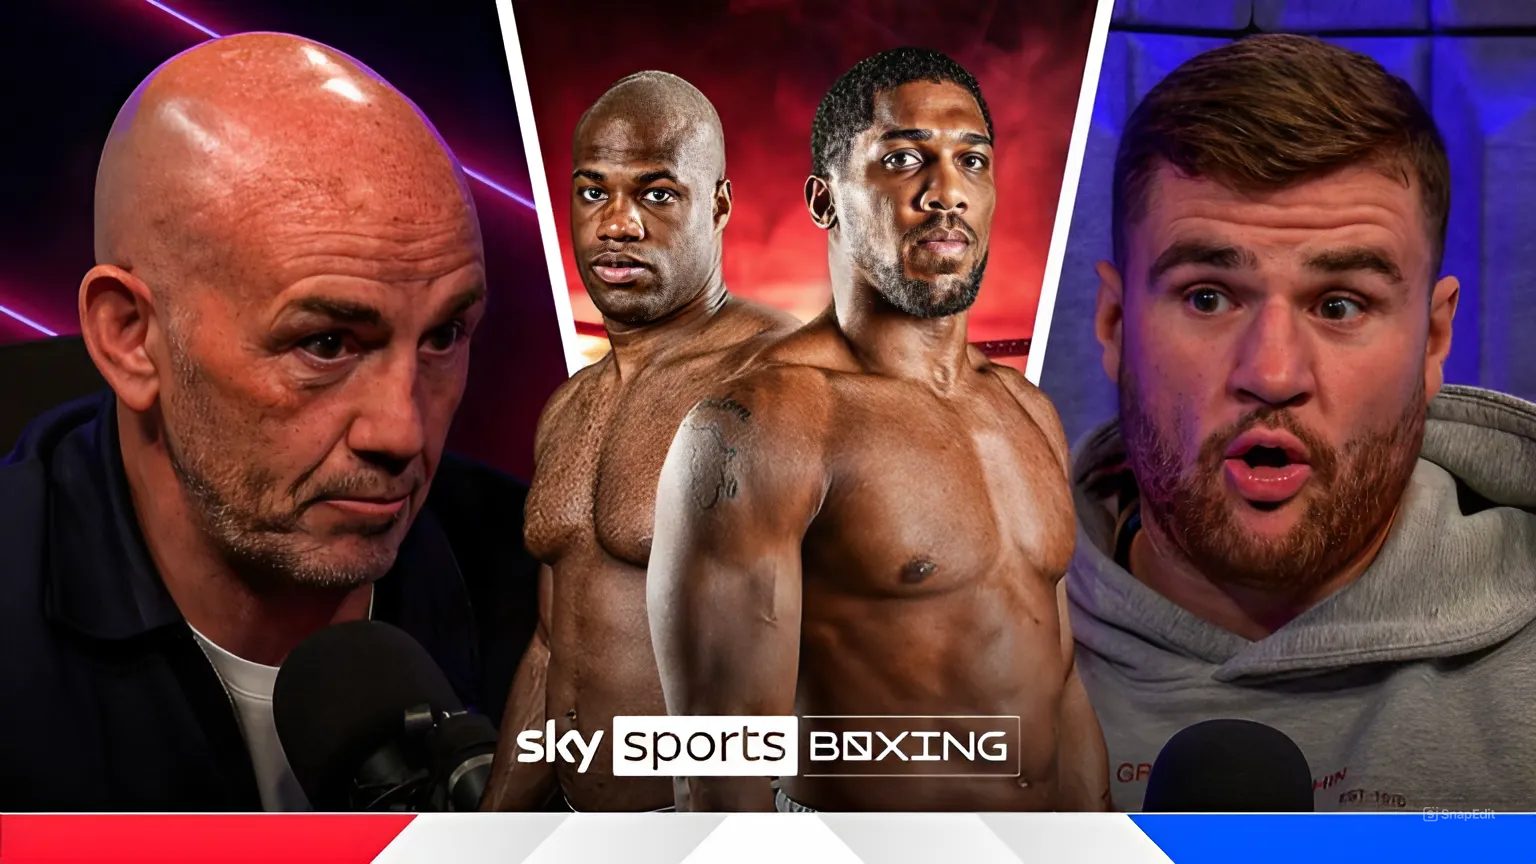 Cover Image for Anthony Joshua should expect “a firefight” in his heavyweight collision with Daniel Dubois, warns Johnny Fisher.